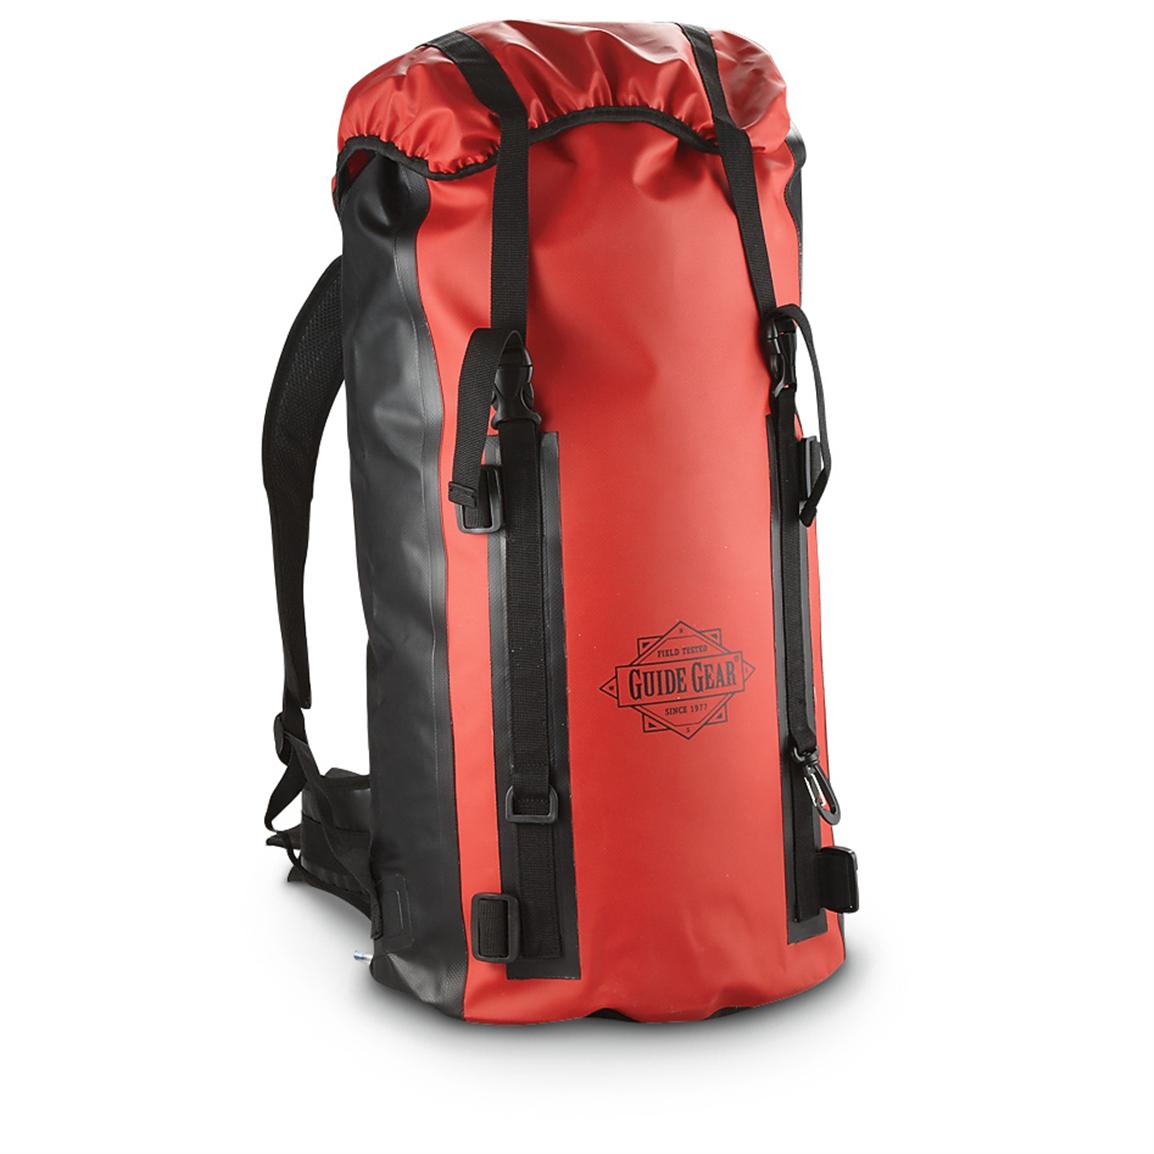 dry bag with backpack straps